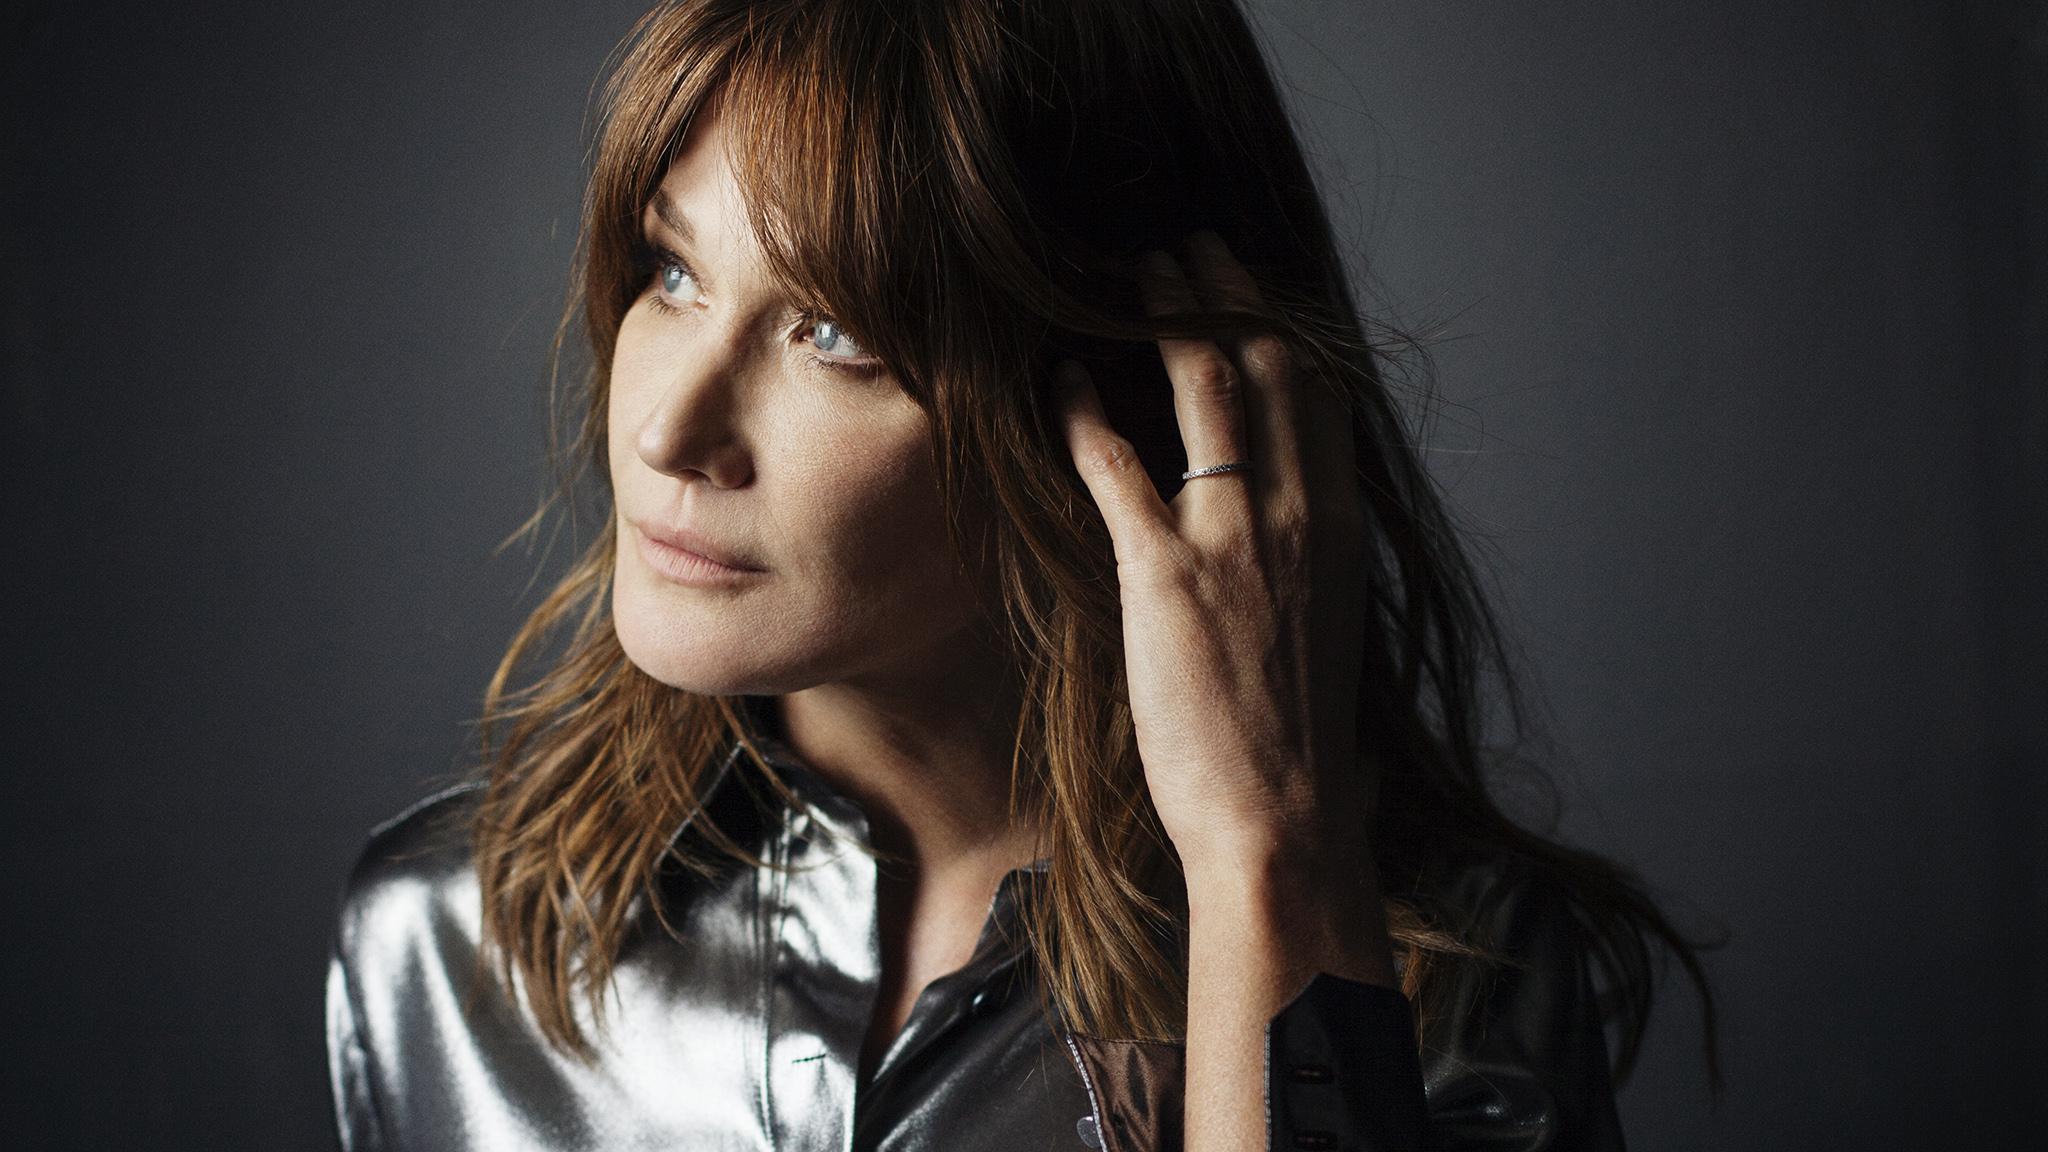 Q&A with singer, songwriter and model Carla Bruni